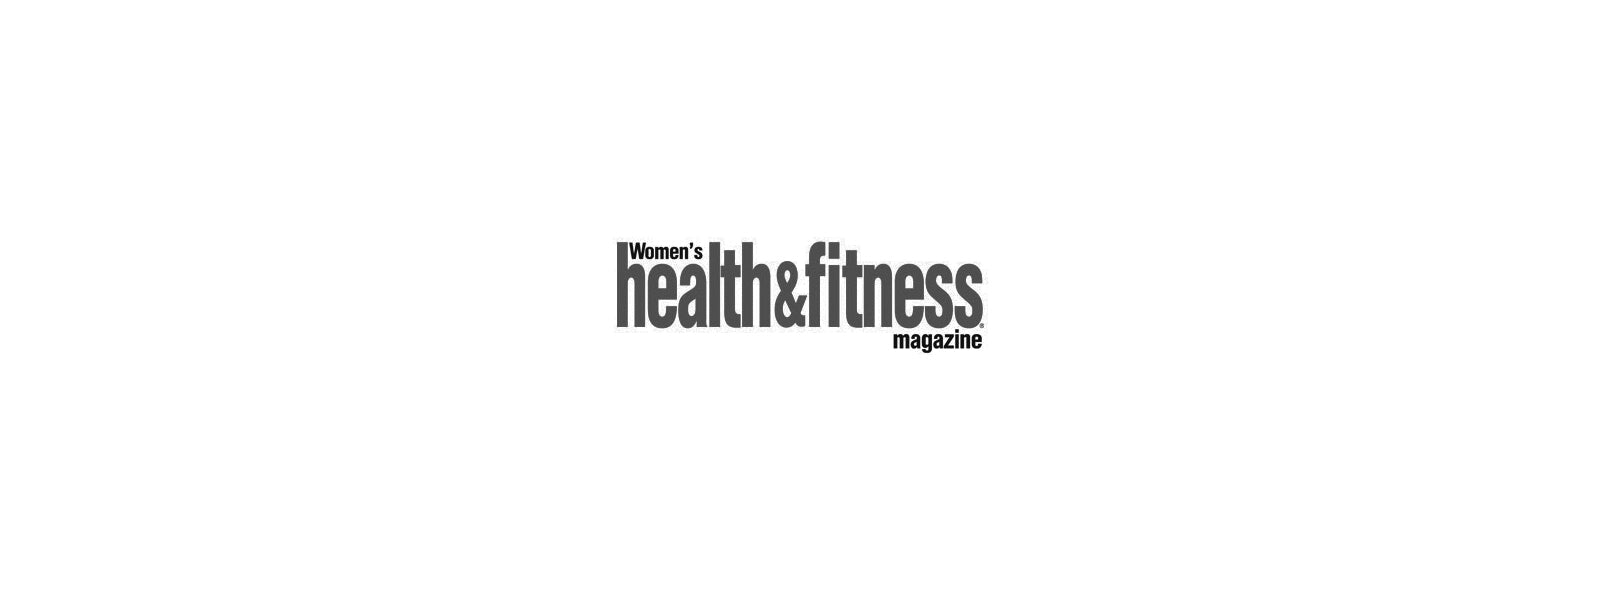 Women's Health & Fitness July 2018 – Downtime Without the 'Pinch'